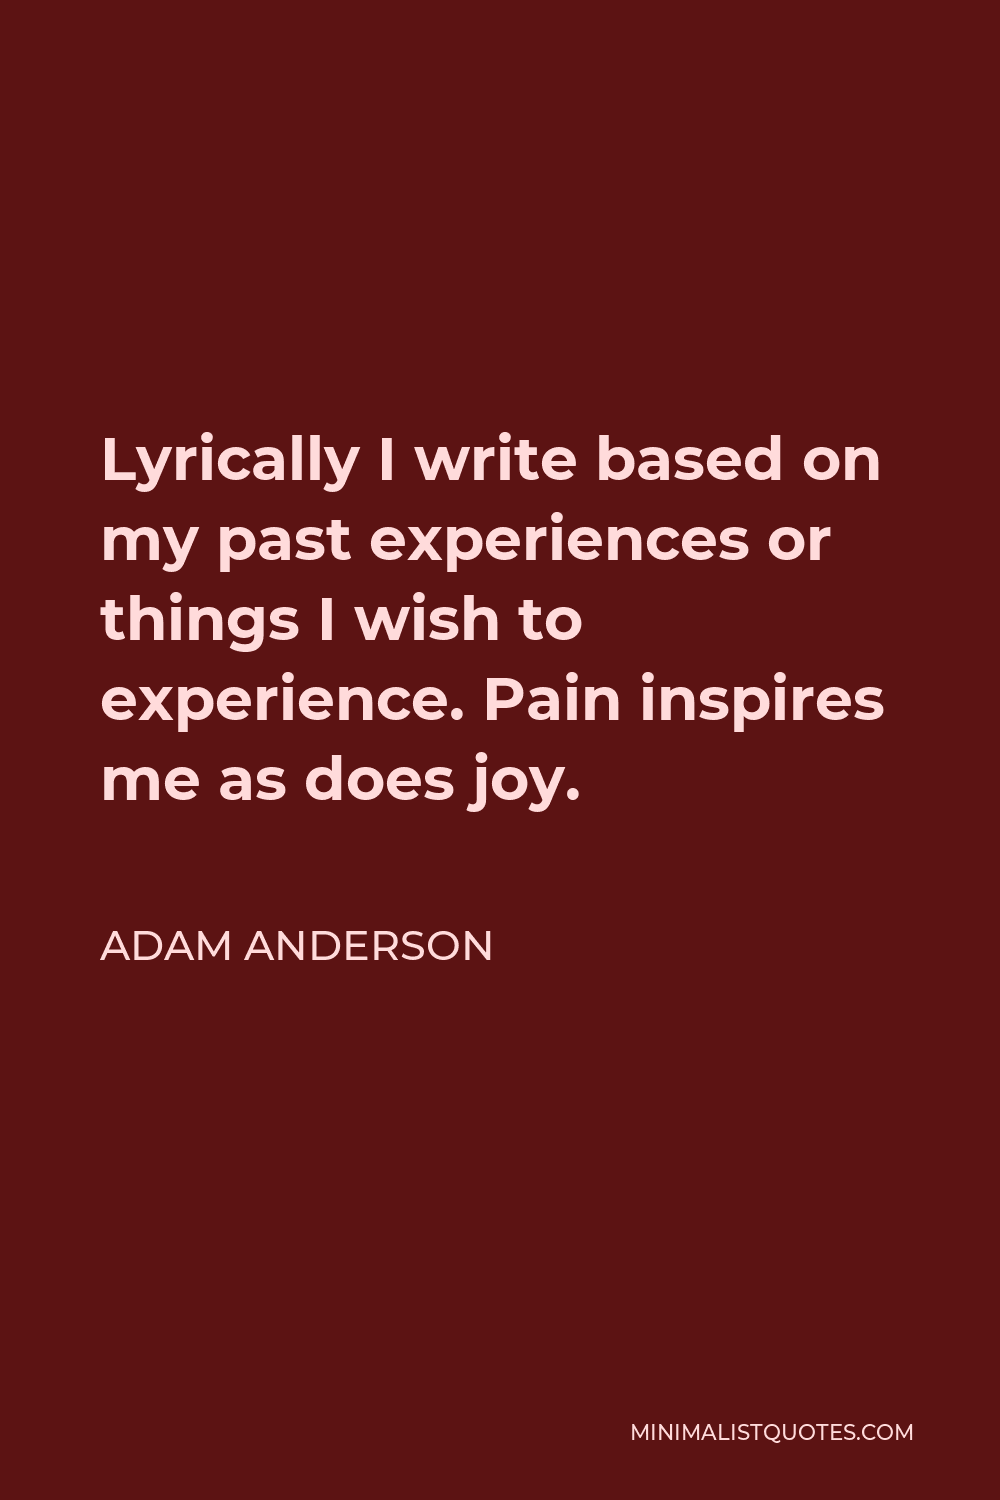 Adam Anderson Quote - Lyrically I write based on my past experiences or things I wish to experience. Pain inspires me as does joy.